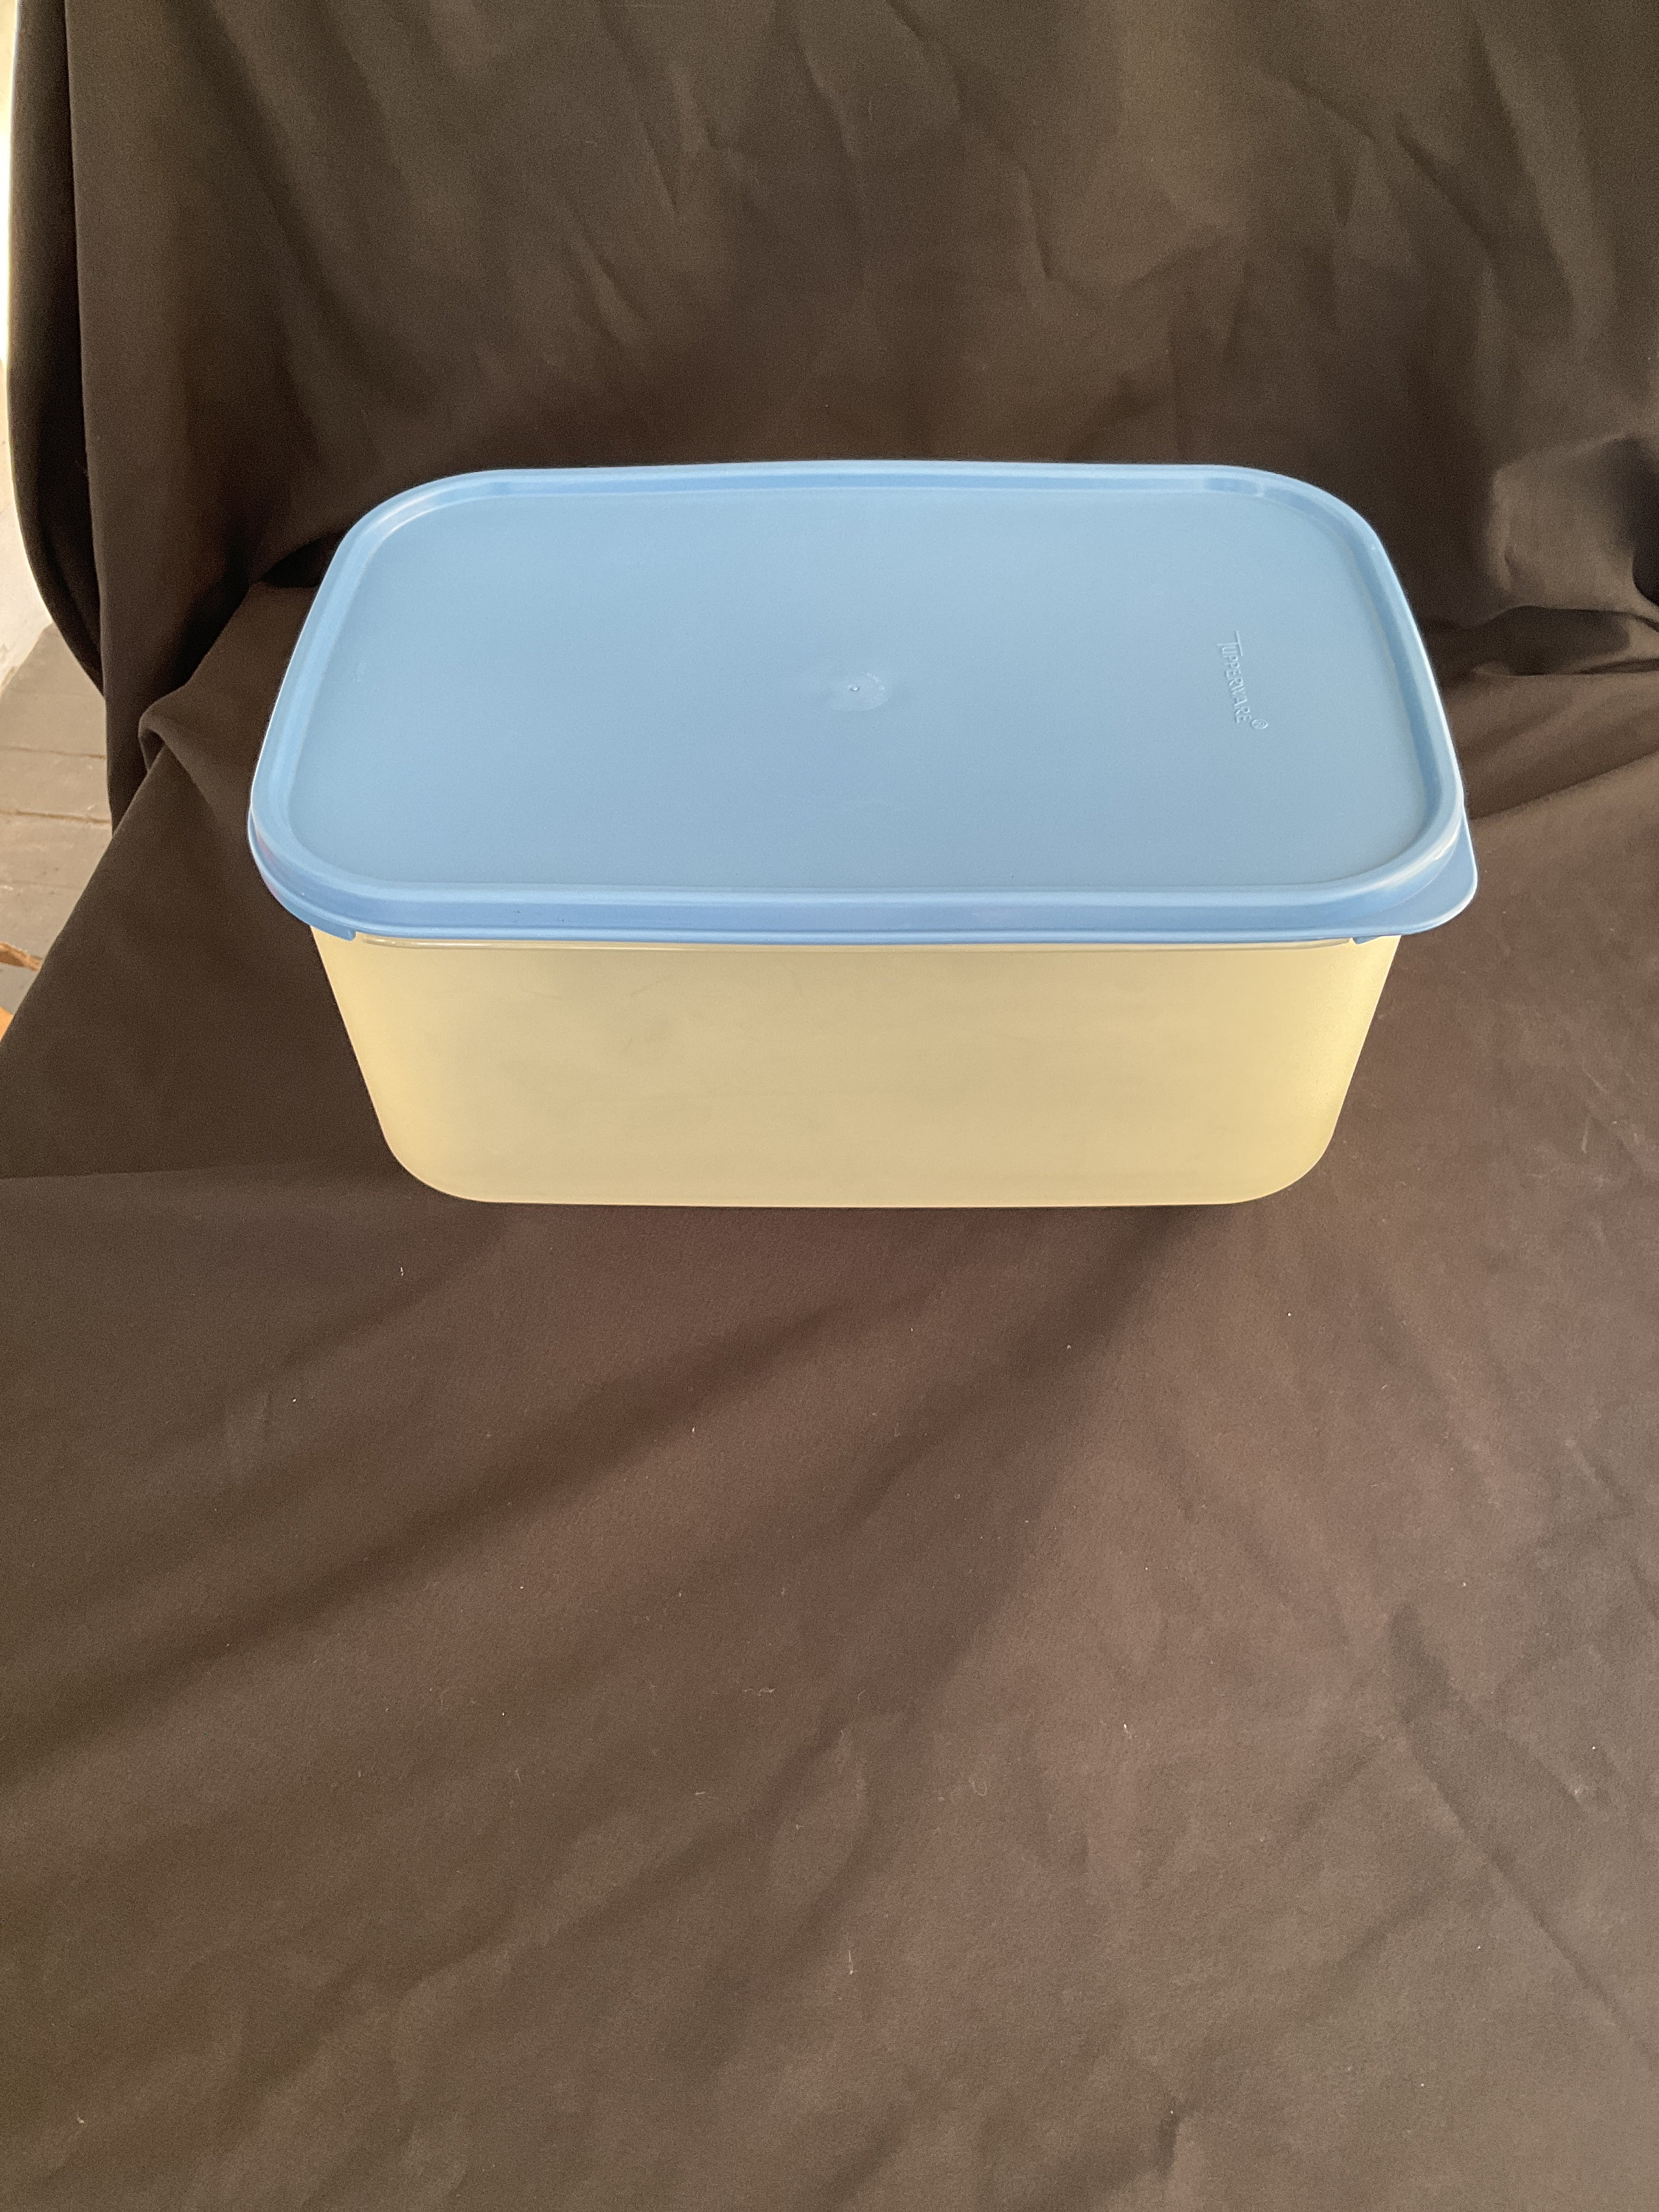 Vintage Tupperware Cereal Container With Pink Pop Top Lid and